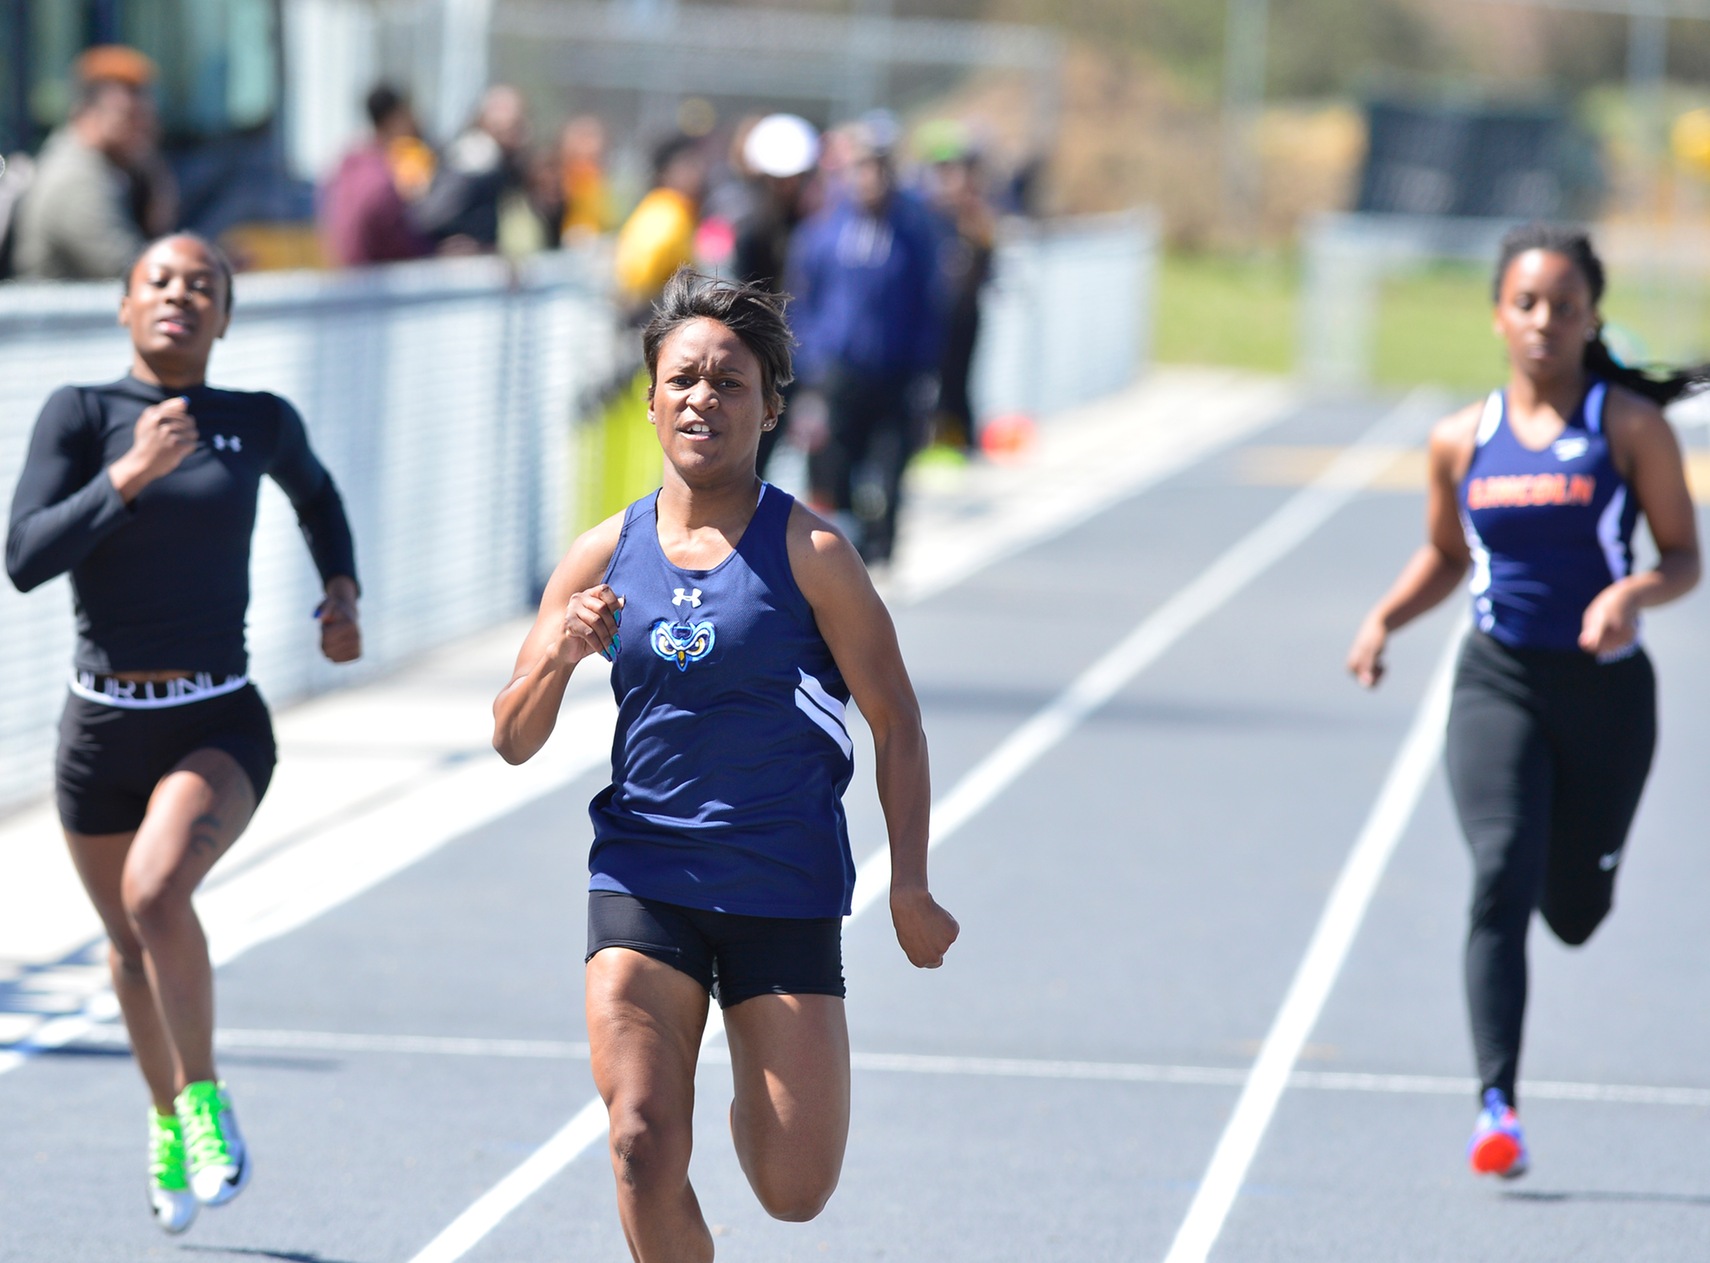 Foday Wins 200m Dash At 2017 Delaware Classic To Lead Prince George's Track And Field